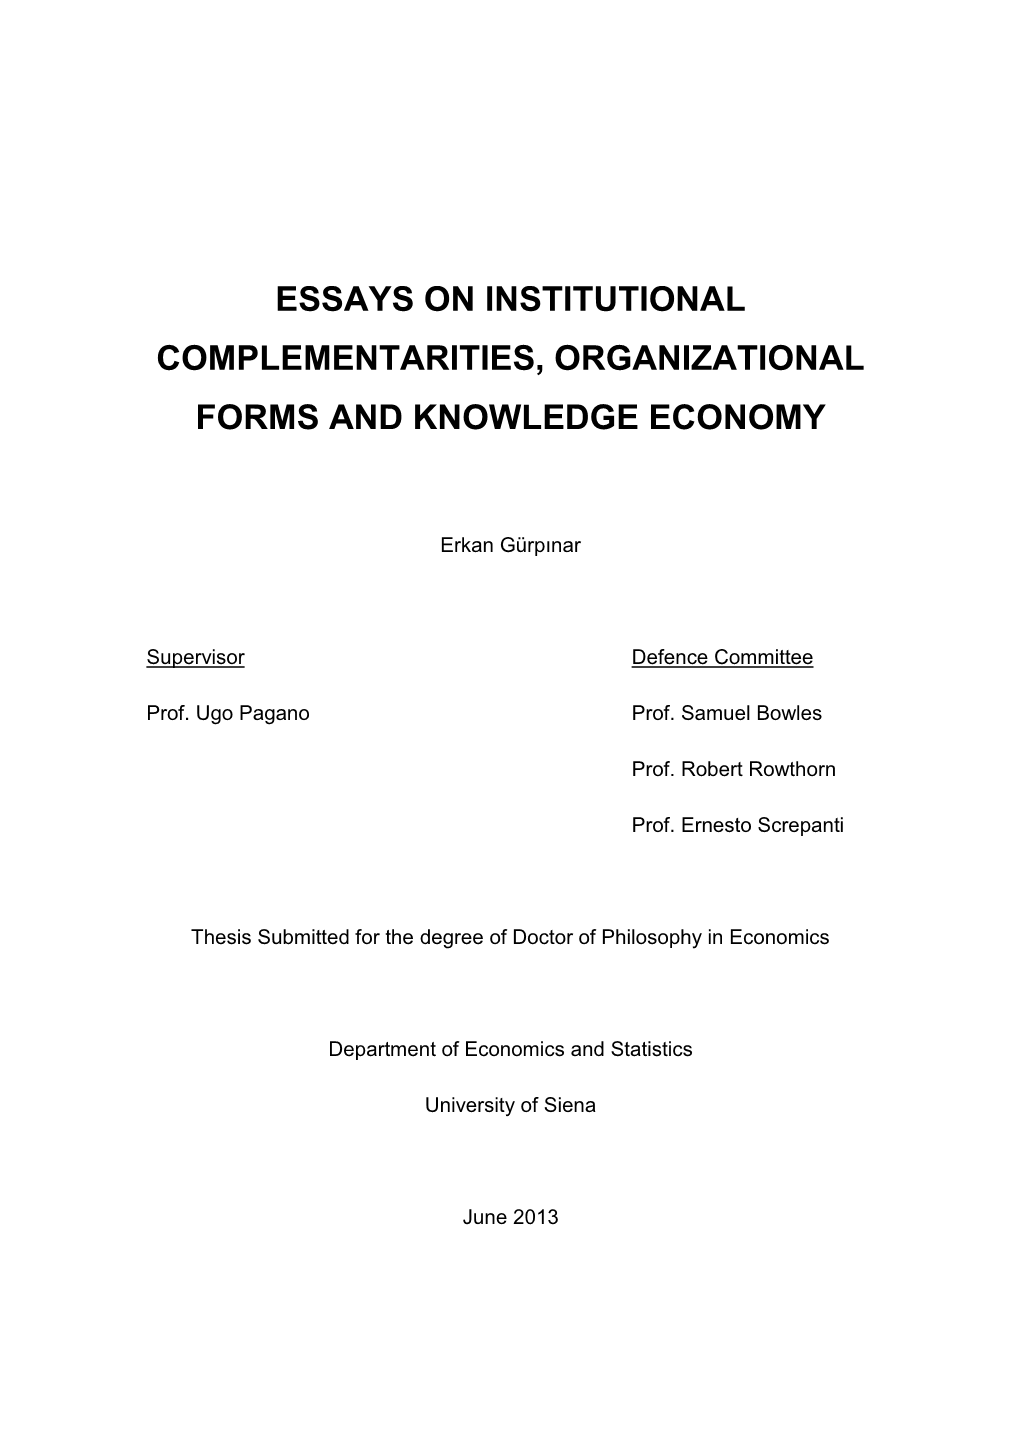 Essays on Institutional Complementarities, Organizational Forms and Knowledge Economy